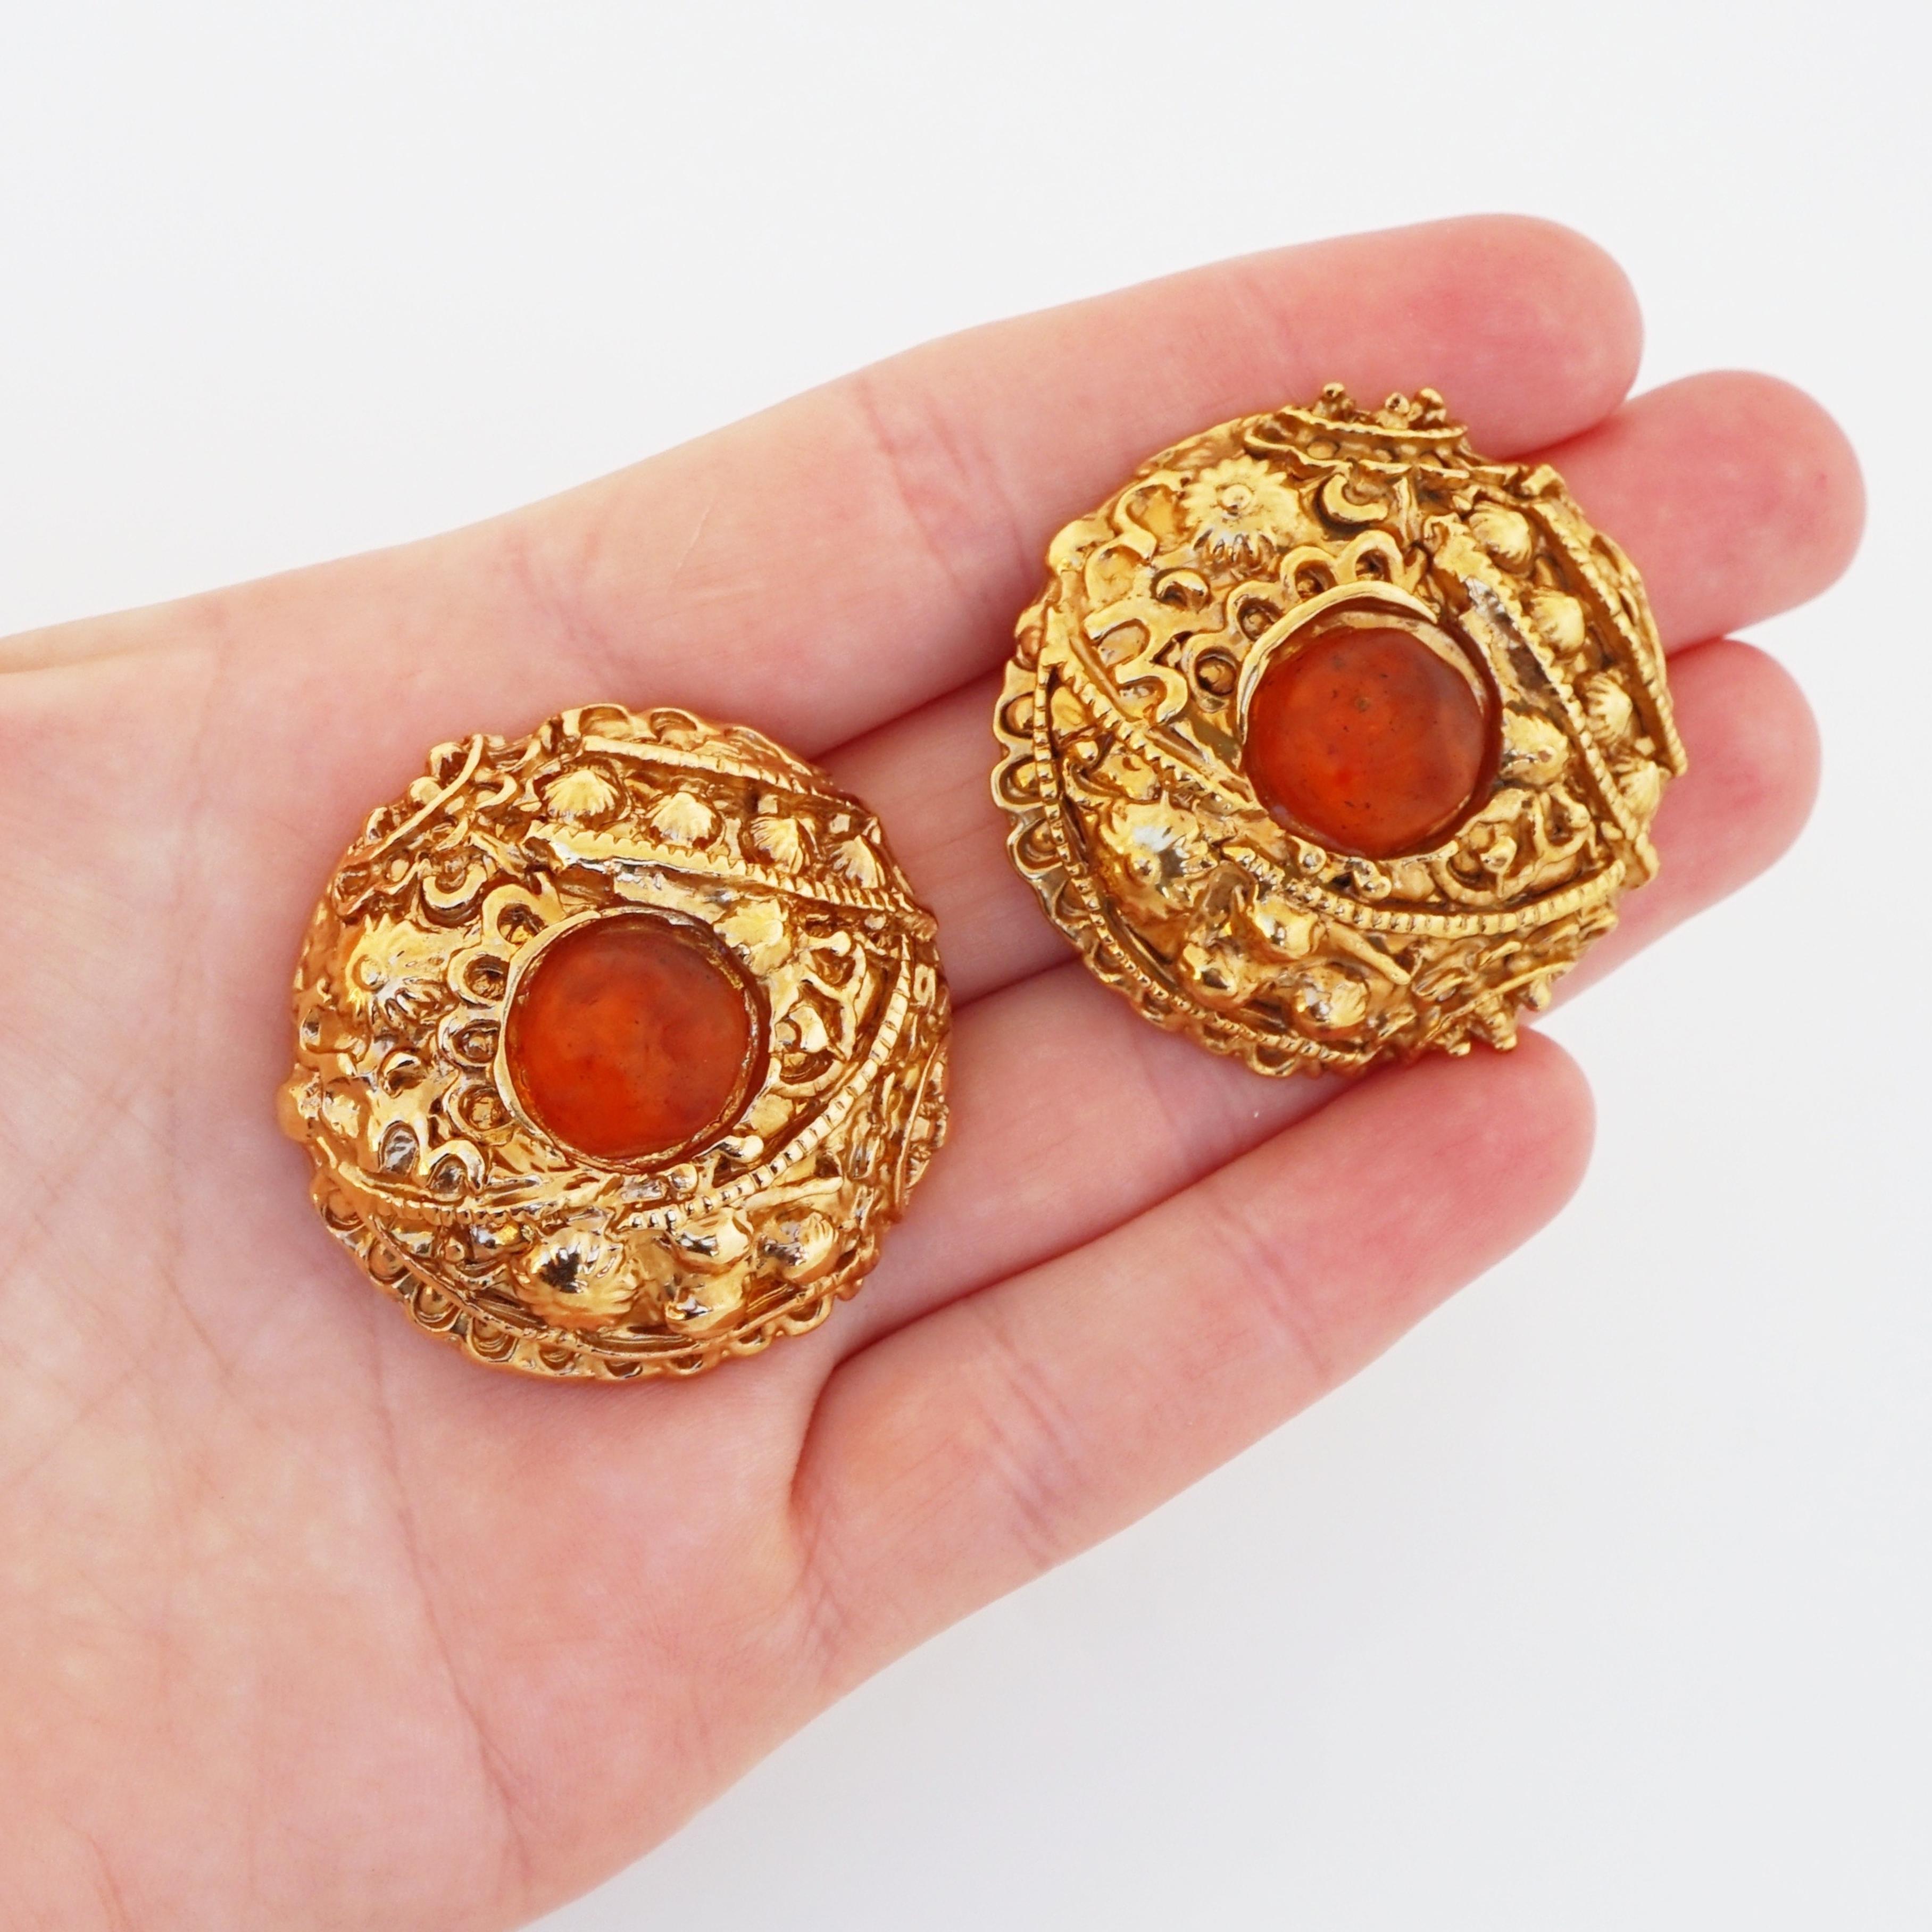 Textured Gilt Statement Earrings With Amber Cabochons By Alexis Lahellec, 1980s For Sale 2